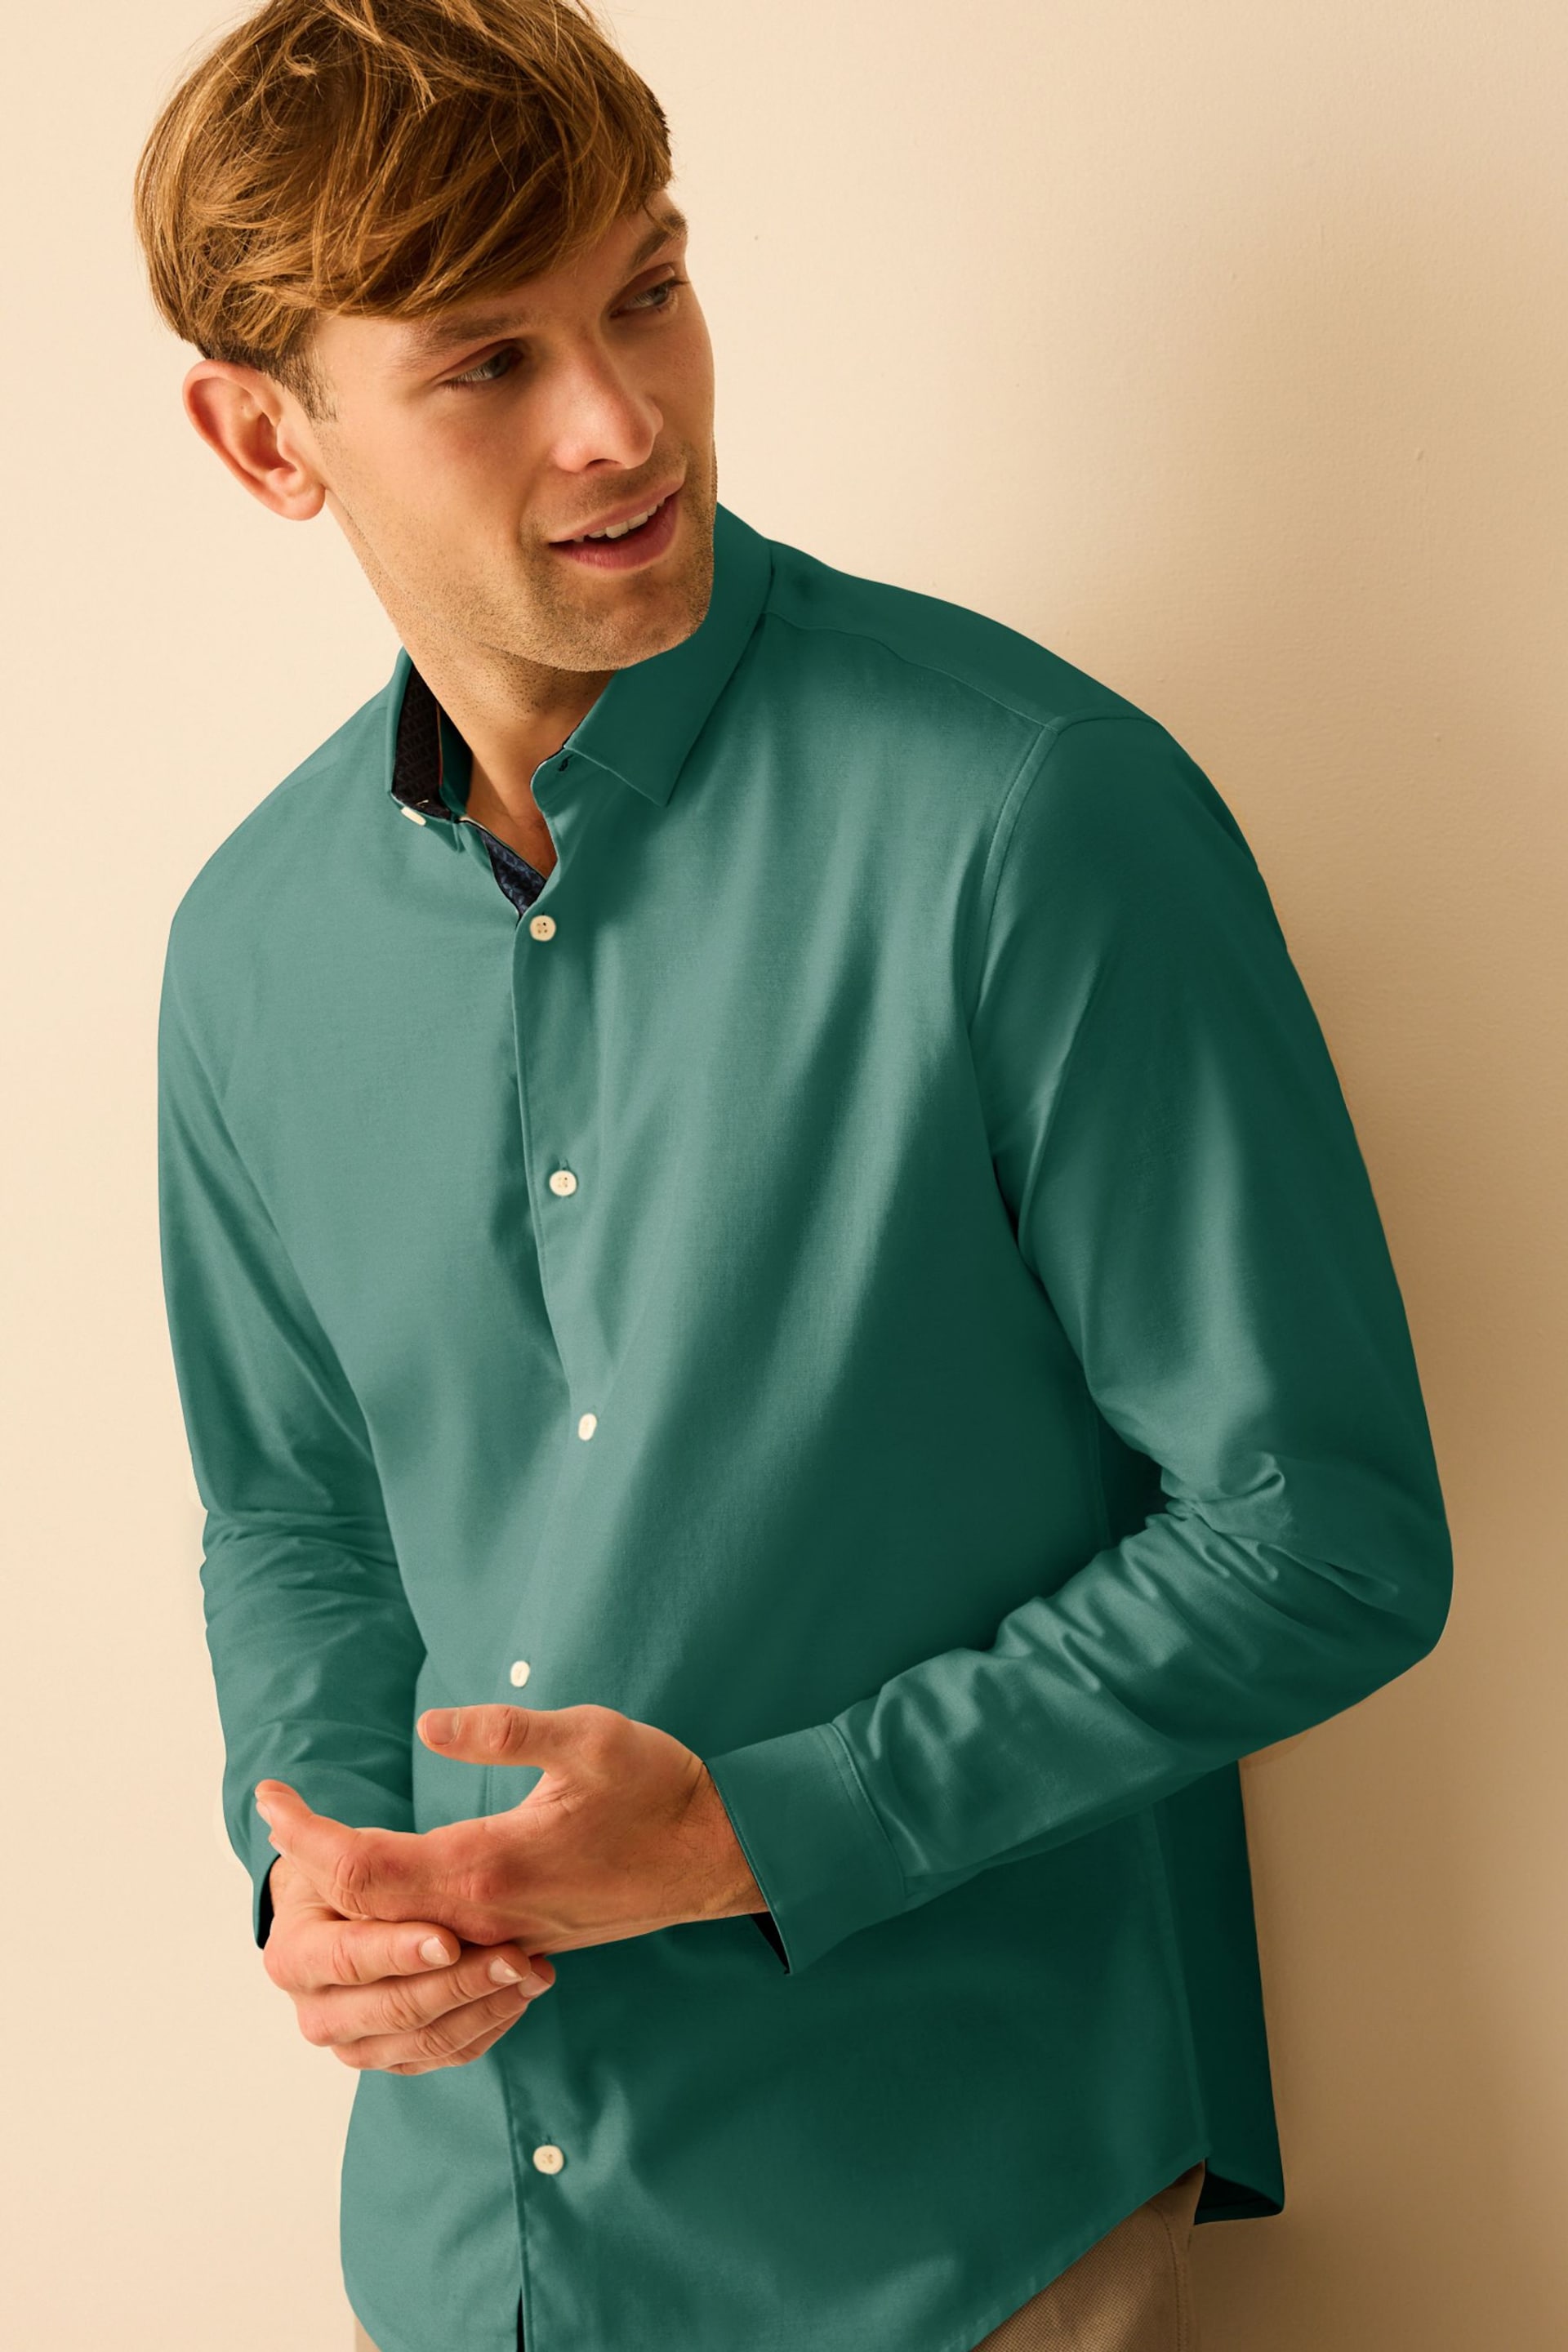 Blue Stretch Oxford Long Sleeve Shirt - Image 1 of 9